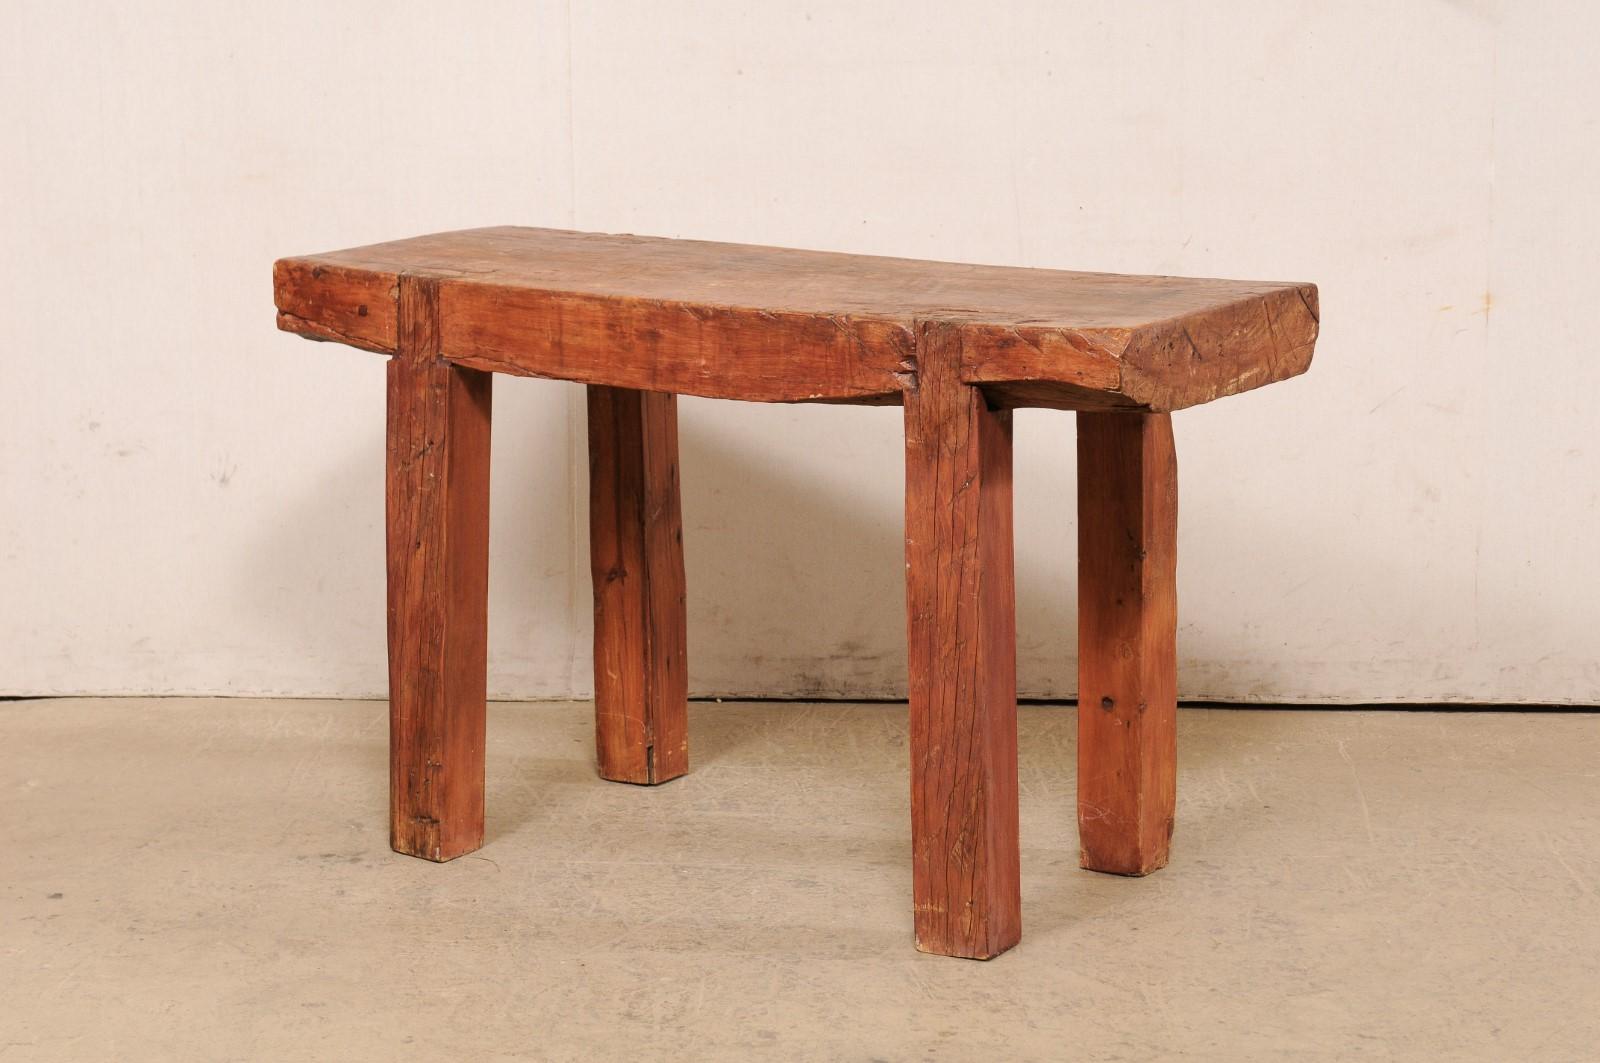 Wood Beautifully Rustic Thick Chopping Block Top Table Would Be a Great Sink Base